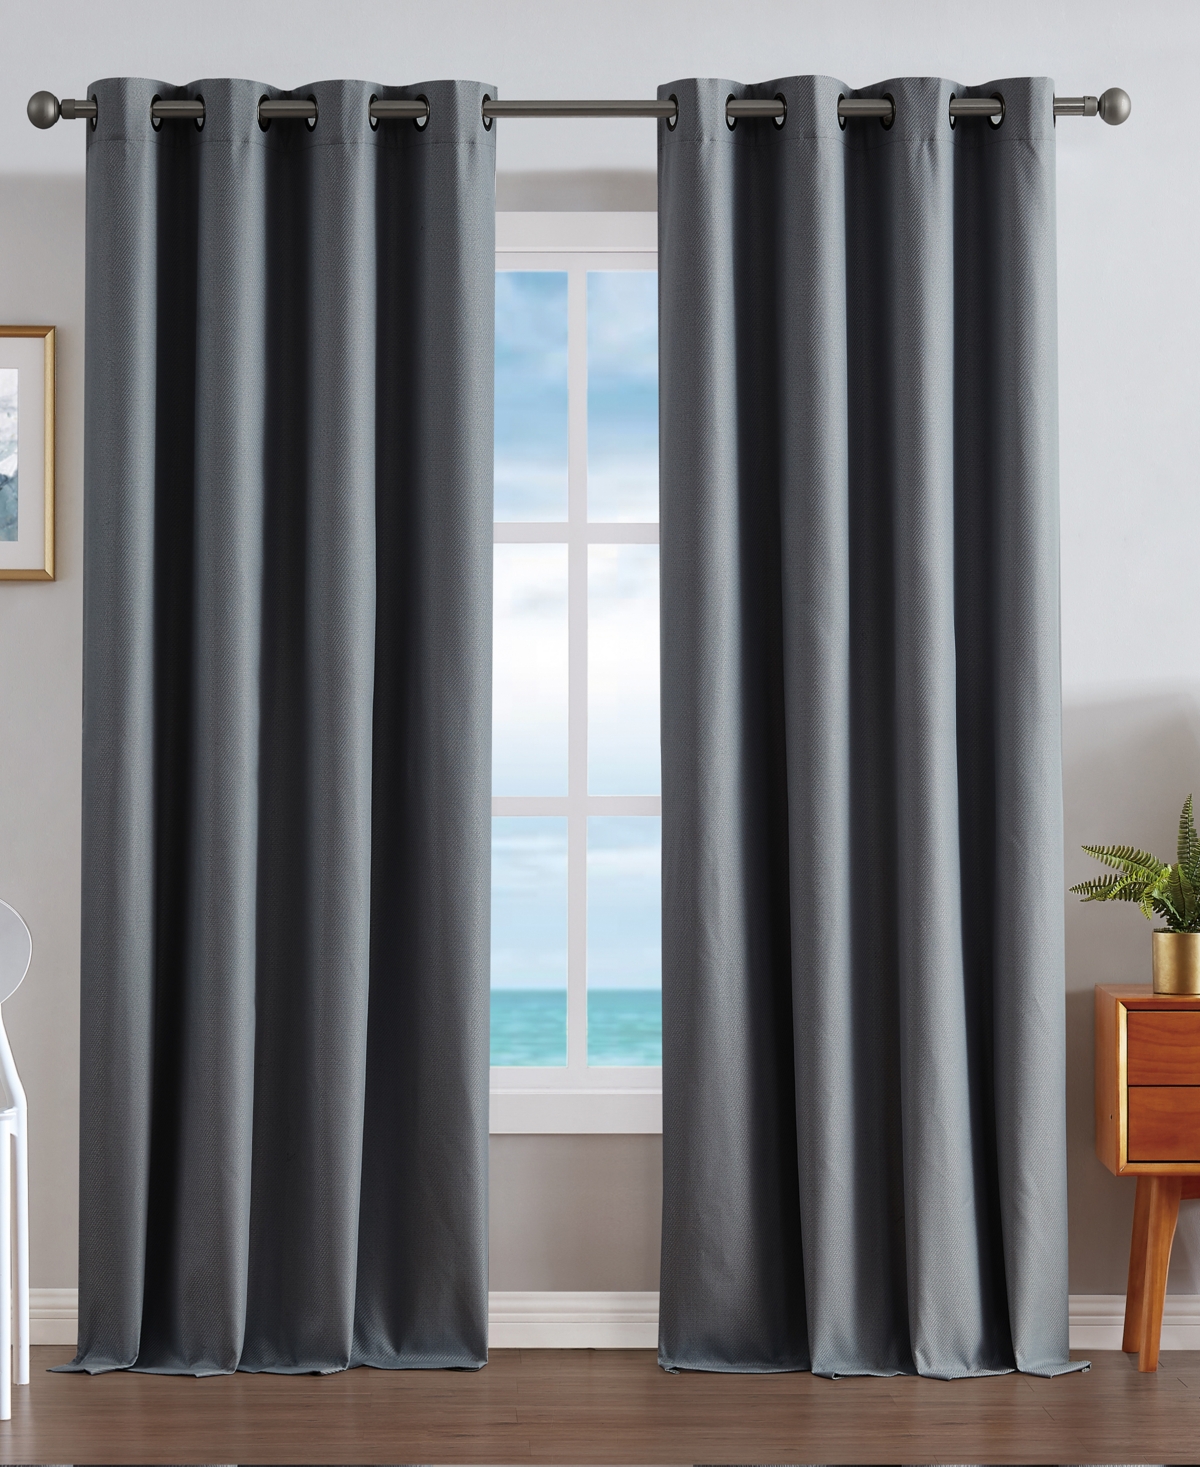 Providence Ultimate Blackout Grommet Window Curtain Panel Set, 52" x 108" - Charcoal